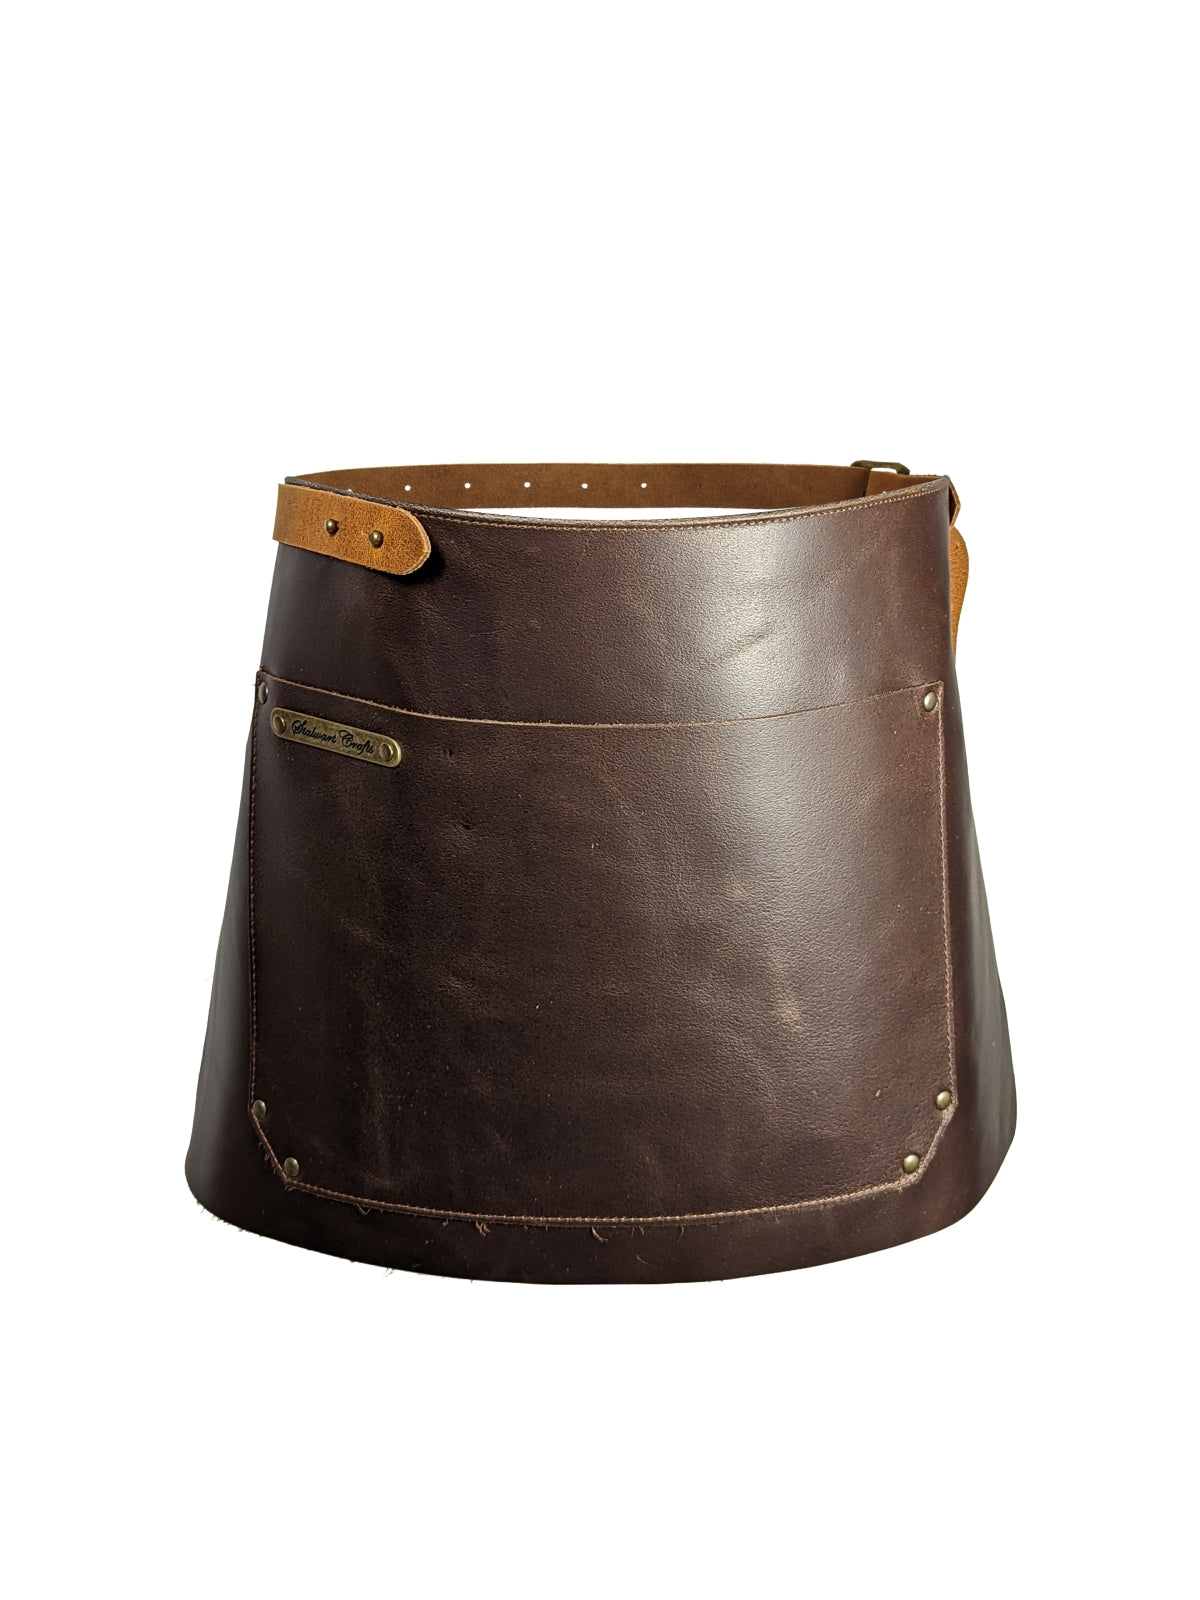 Leather Waist Apron Rustic Brown by STW -  ChefsCotton